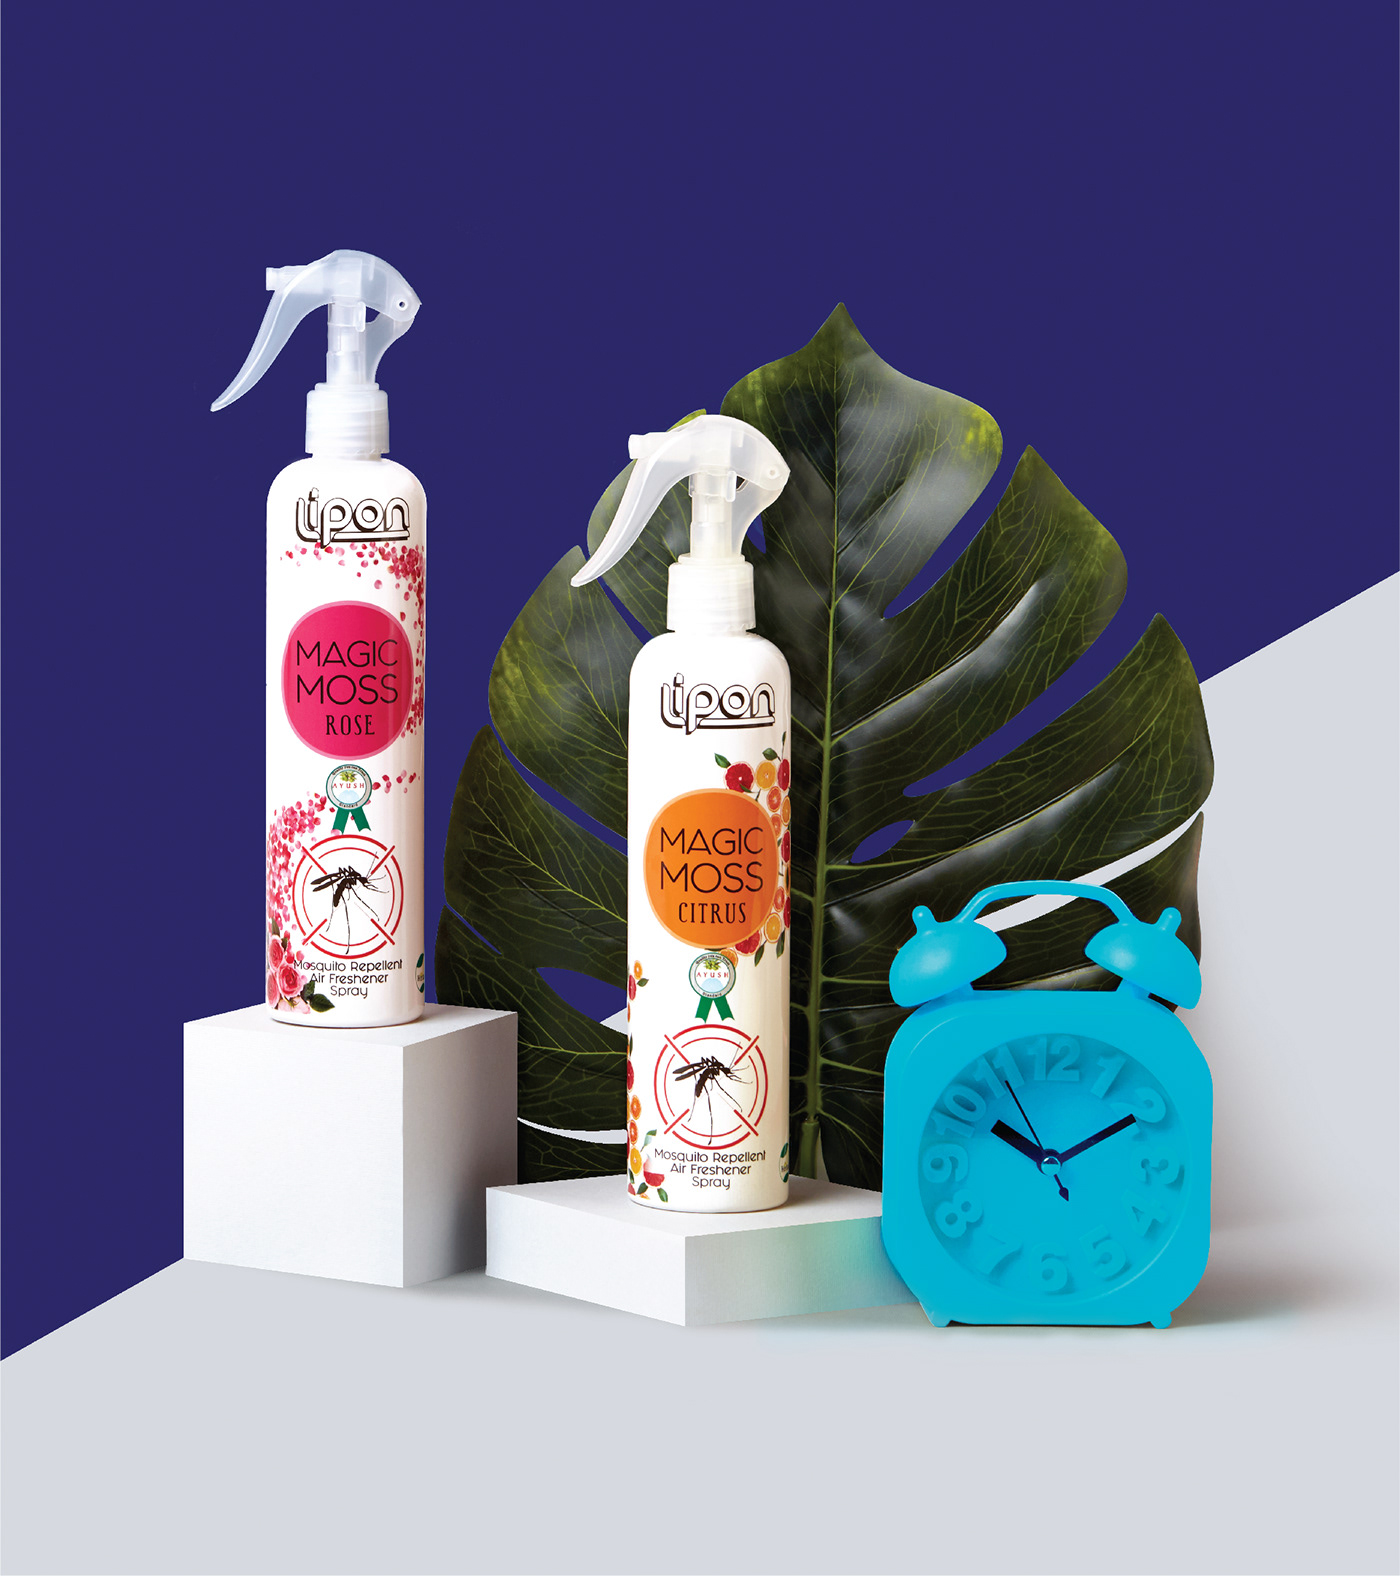 Air Freshener FMCG Fragrance herbal mosquito repellent Nature Photography  Product Photography spray bottles